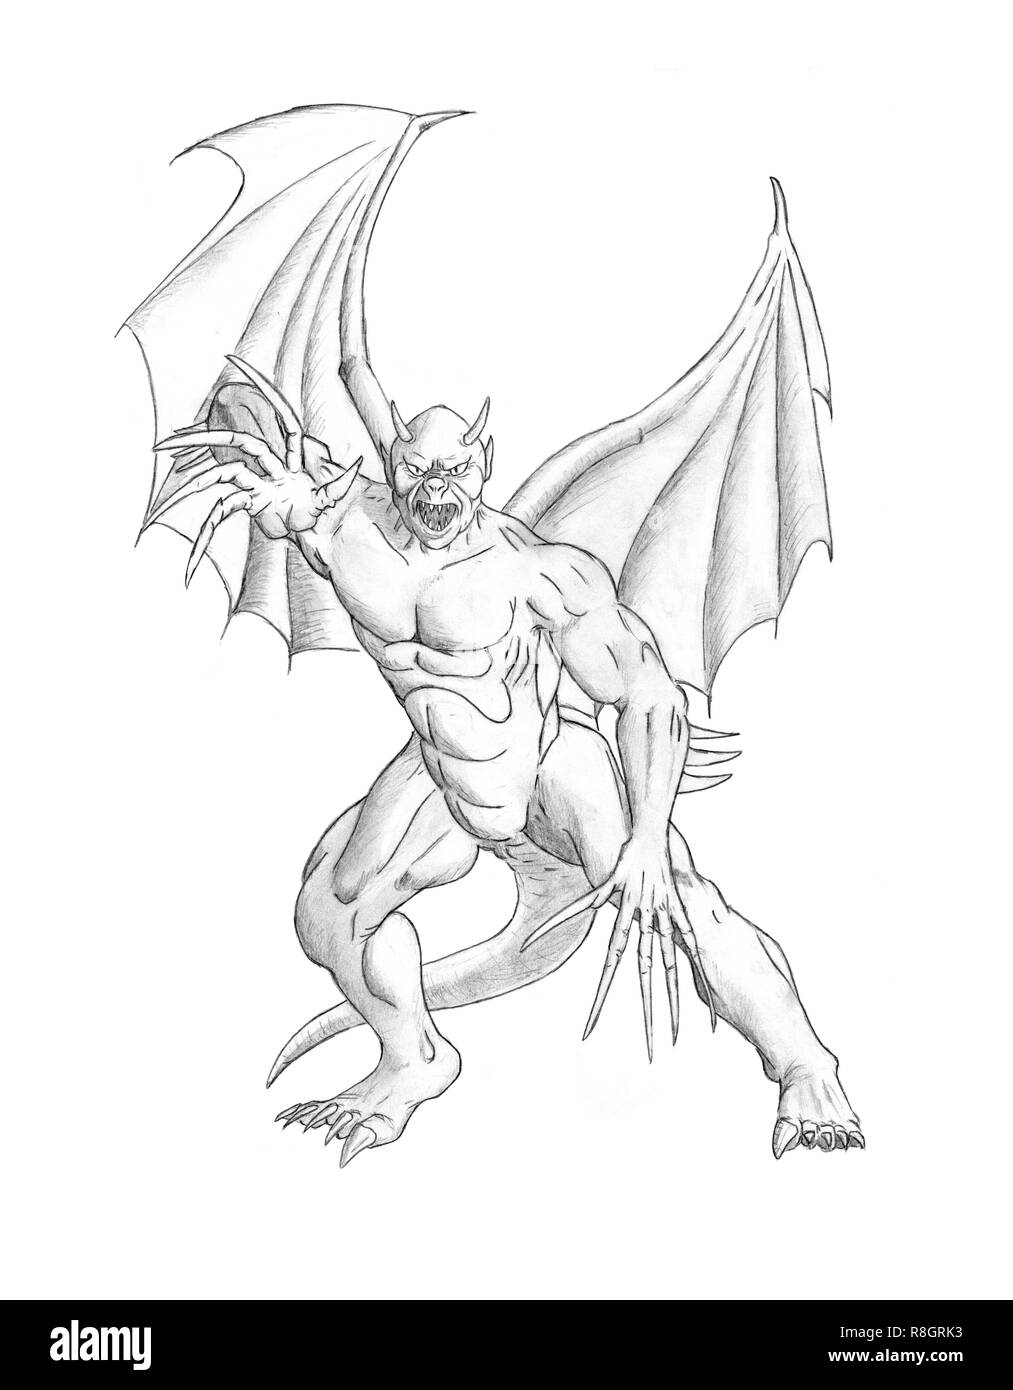 Pencil Concept Art Drawing of Fantasy Winged Demon or Devil Monster Stock Photo